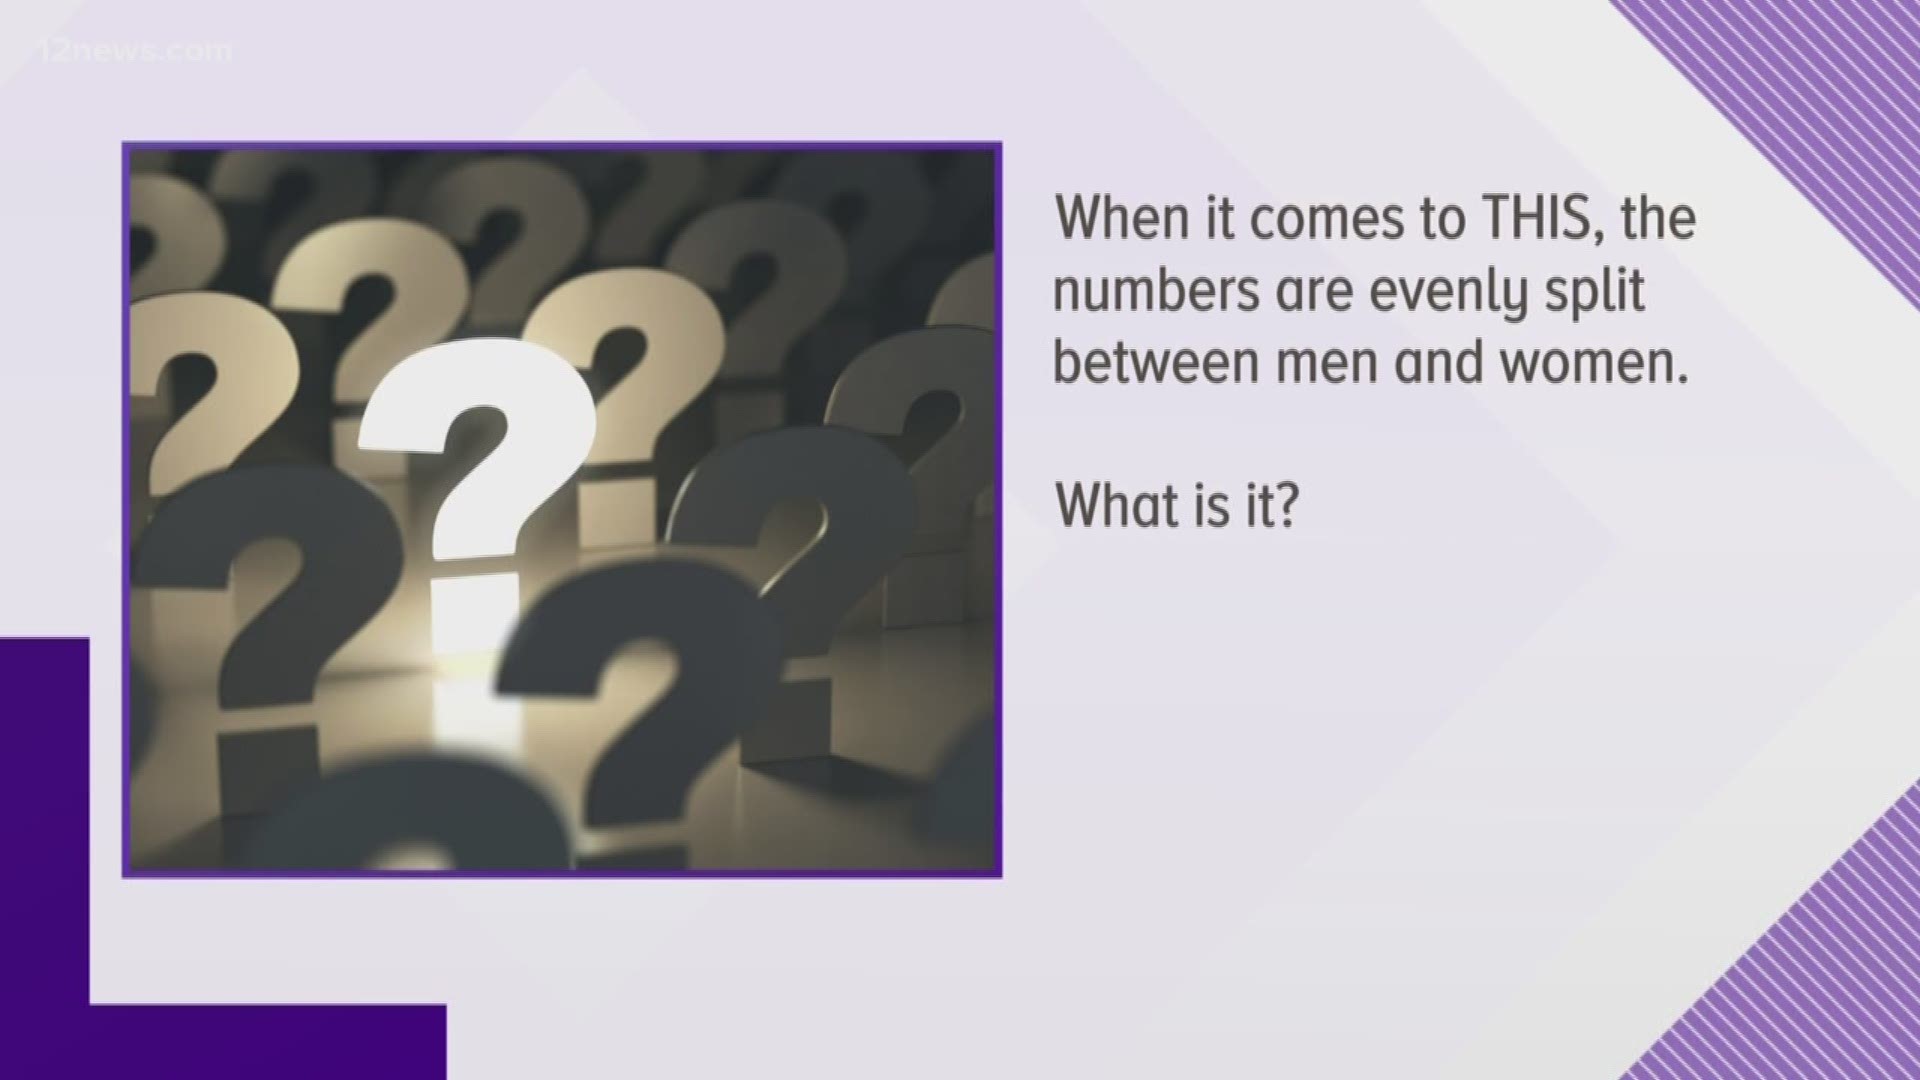 When it comes to this, the numbers are evenly split between men and women. What is it?